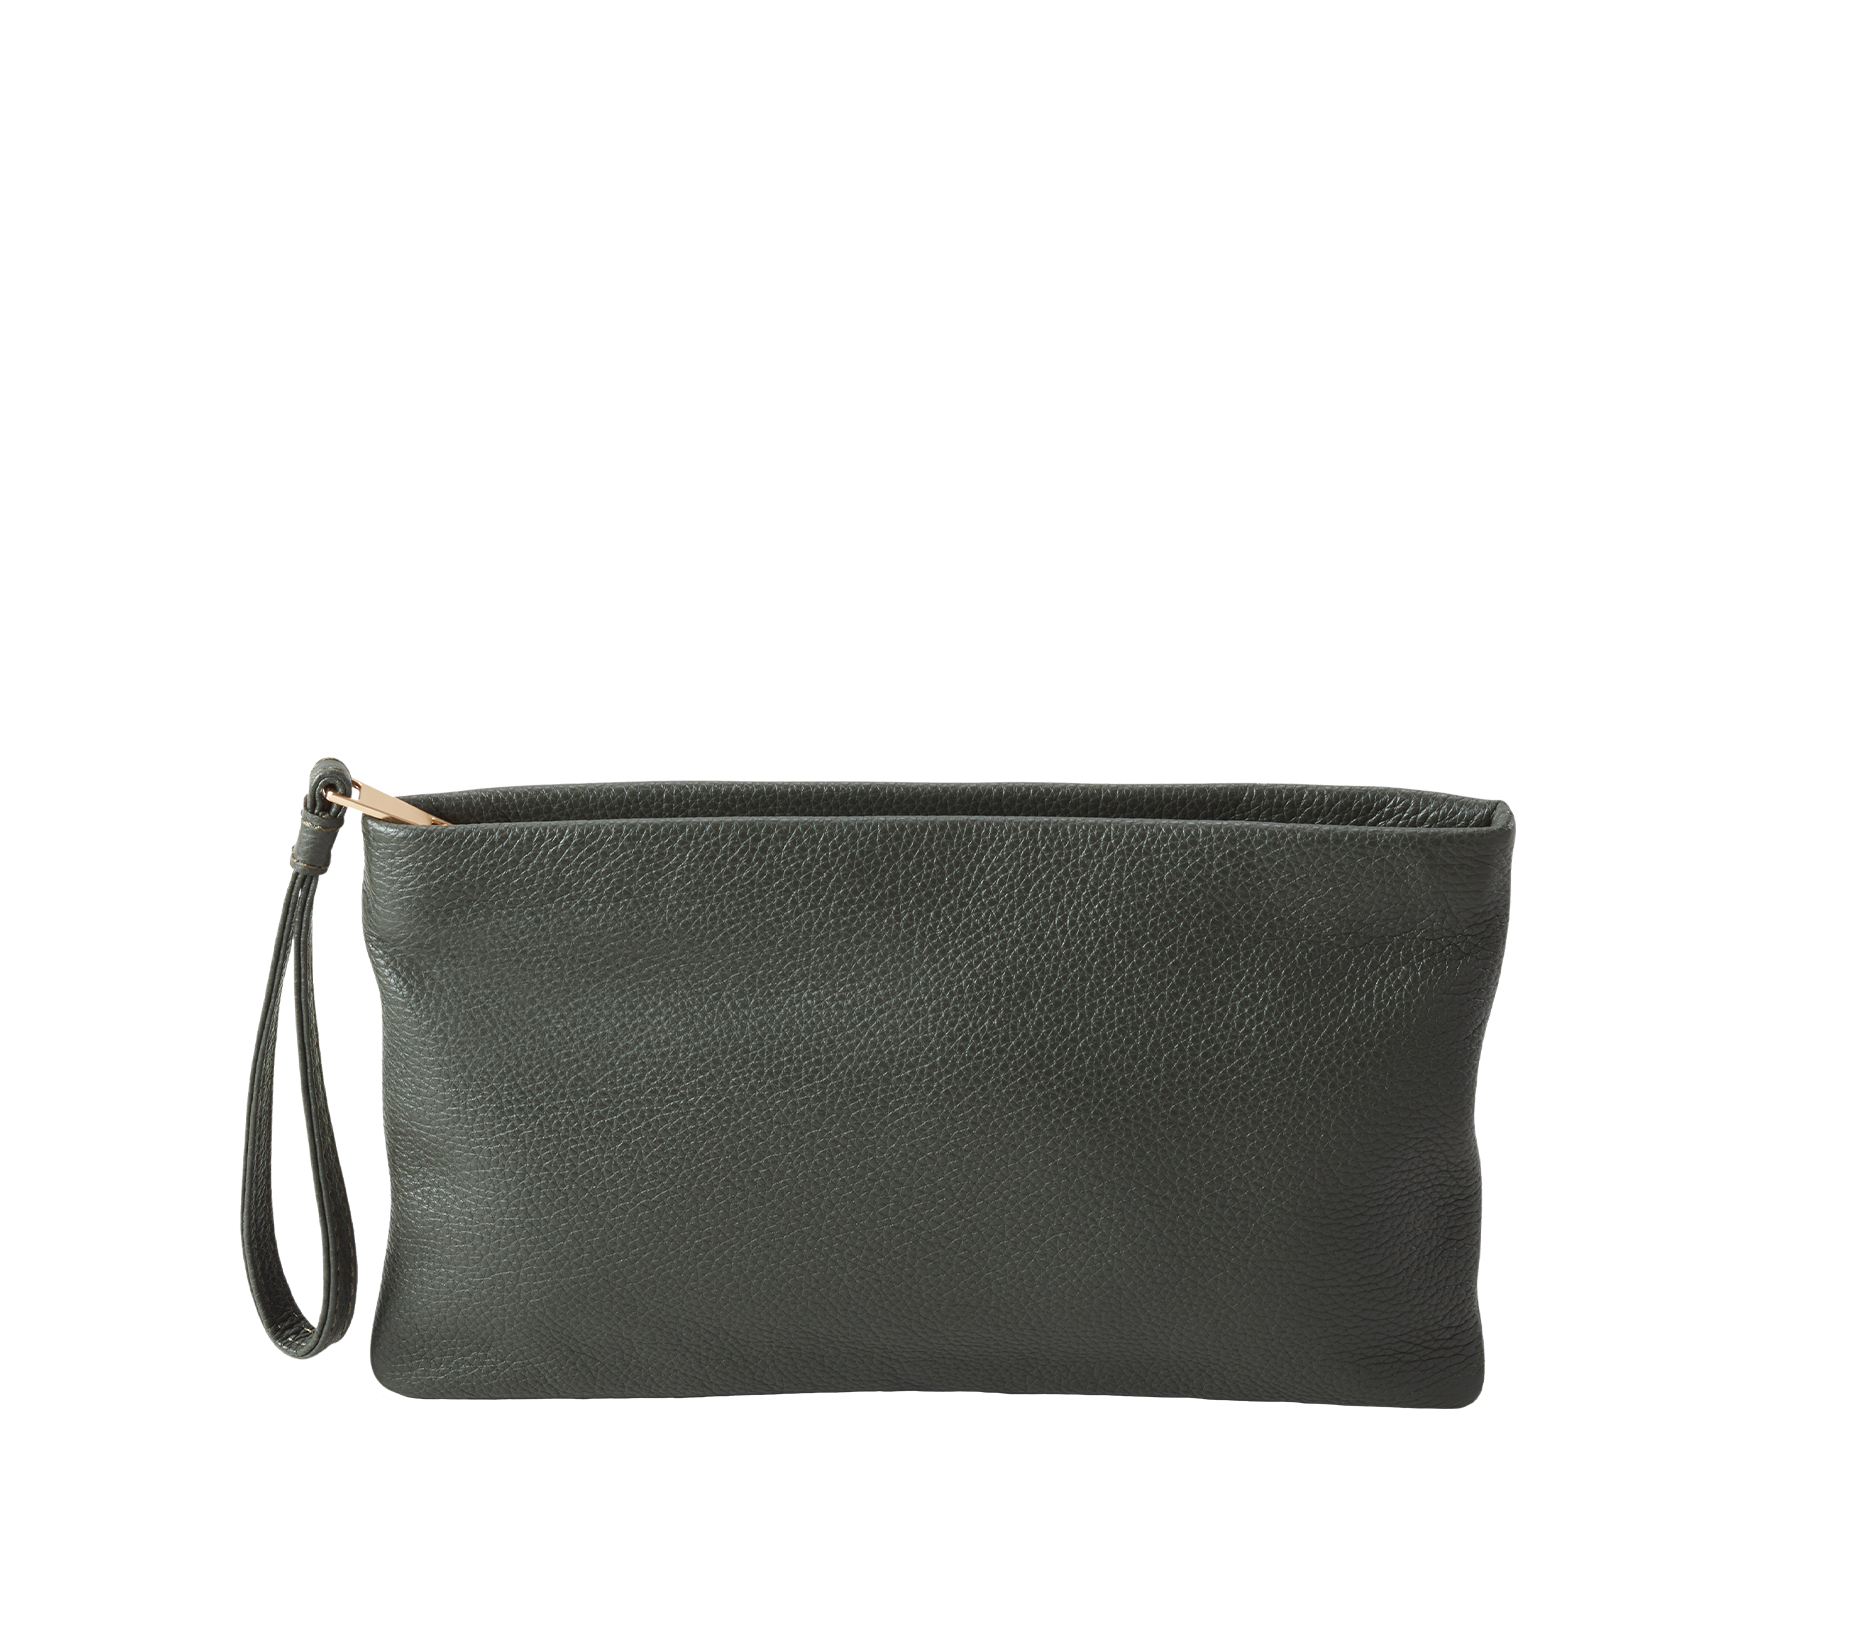 Alexis Travel Clutch in Loden